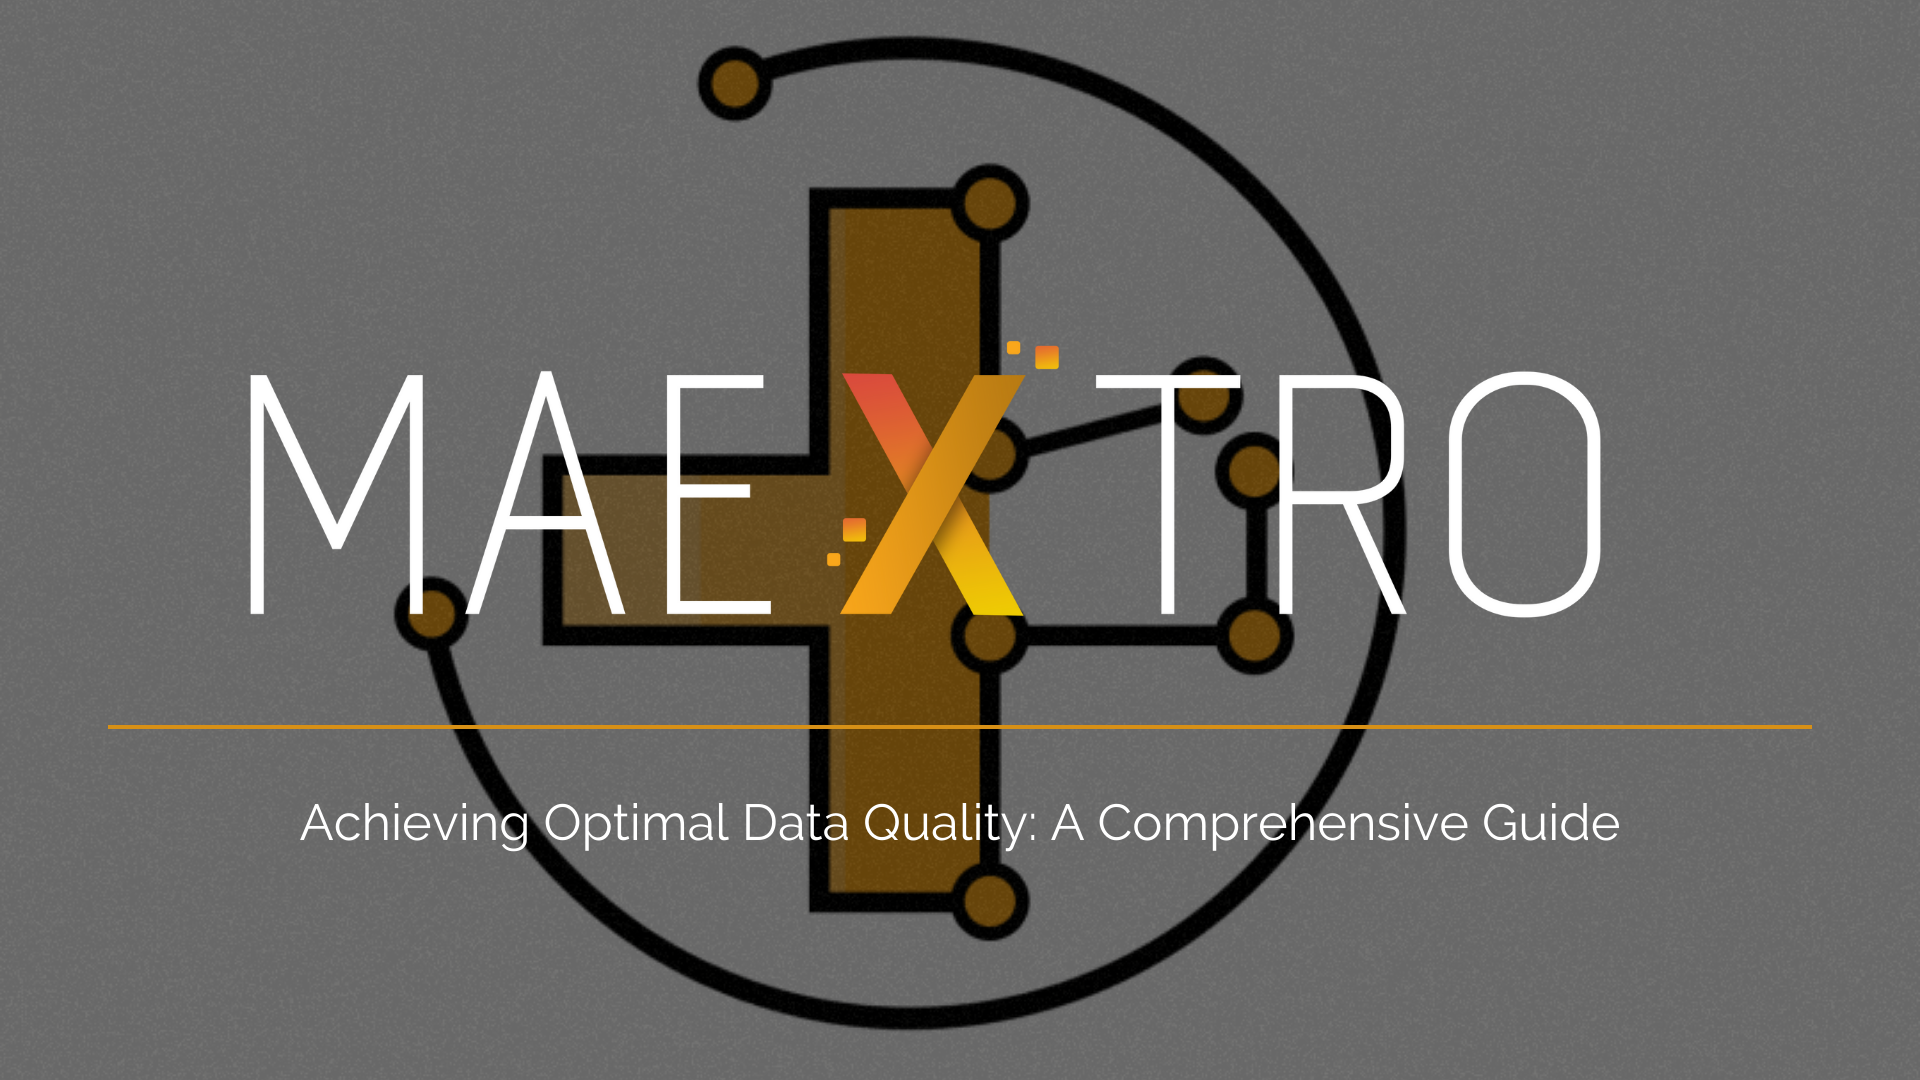 Achieving Optimal Data Quality: A Comprehensive Guide